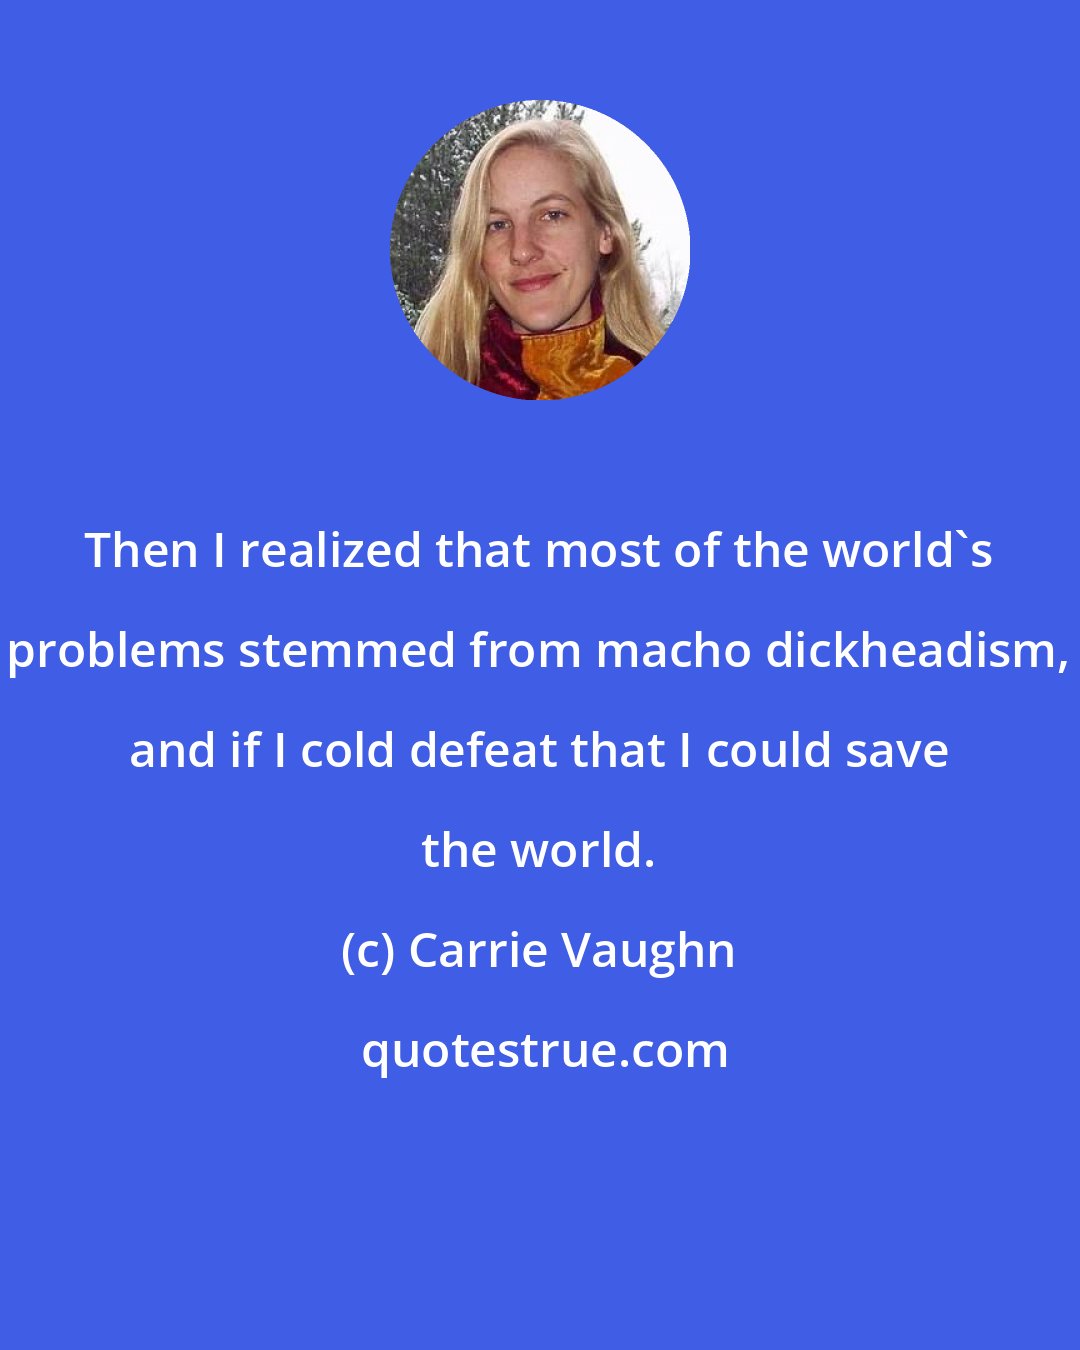 Carrie Vaughn: Then I realized that most of the world's problems stemmed from macho dickheadism, and if I cold defeat that I could save the world.